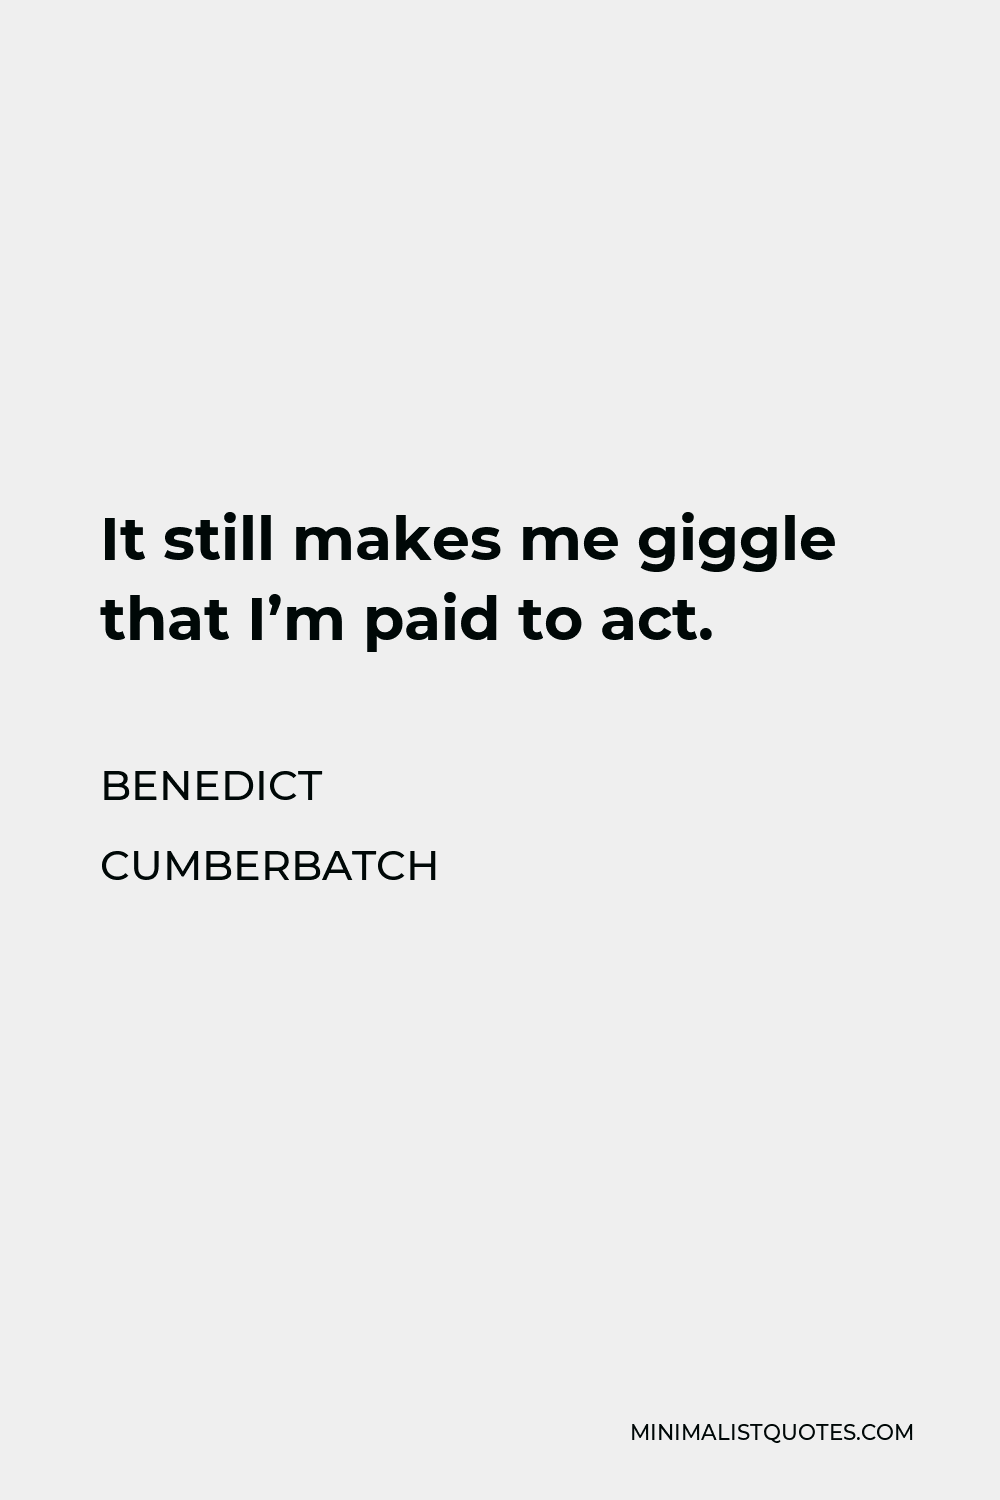 Benedict Cumberbatch Quote - It still makes me giggle that I’m paid to act.